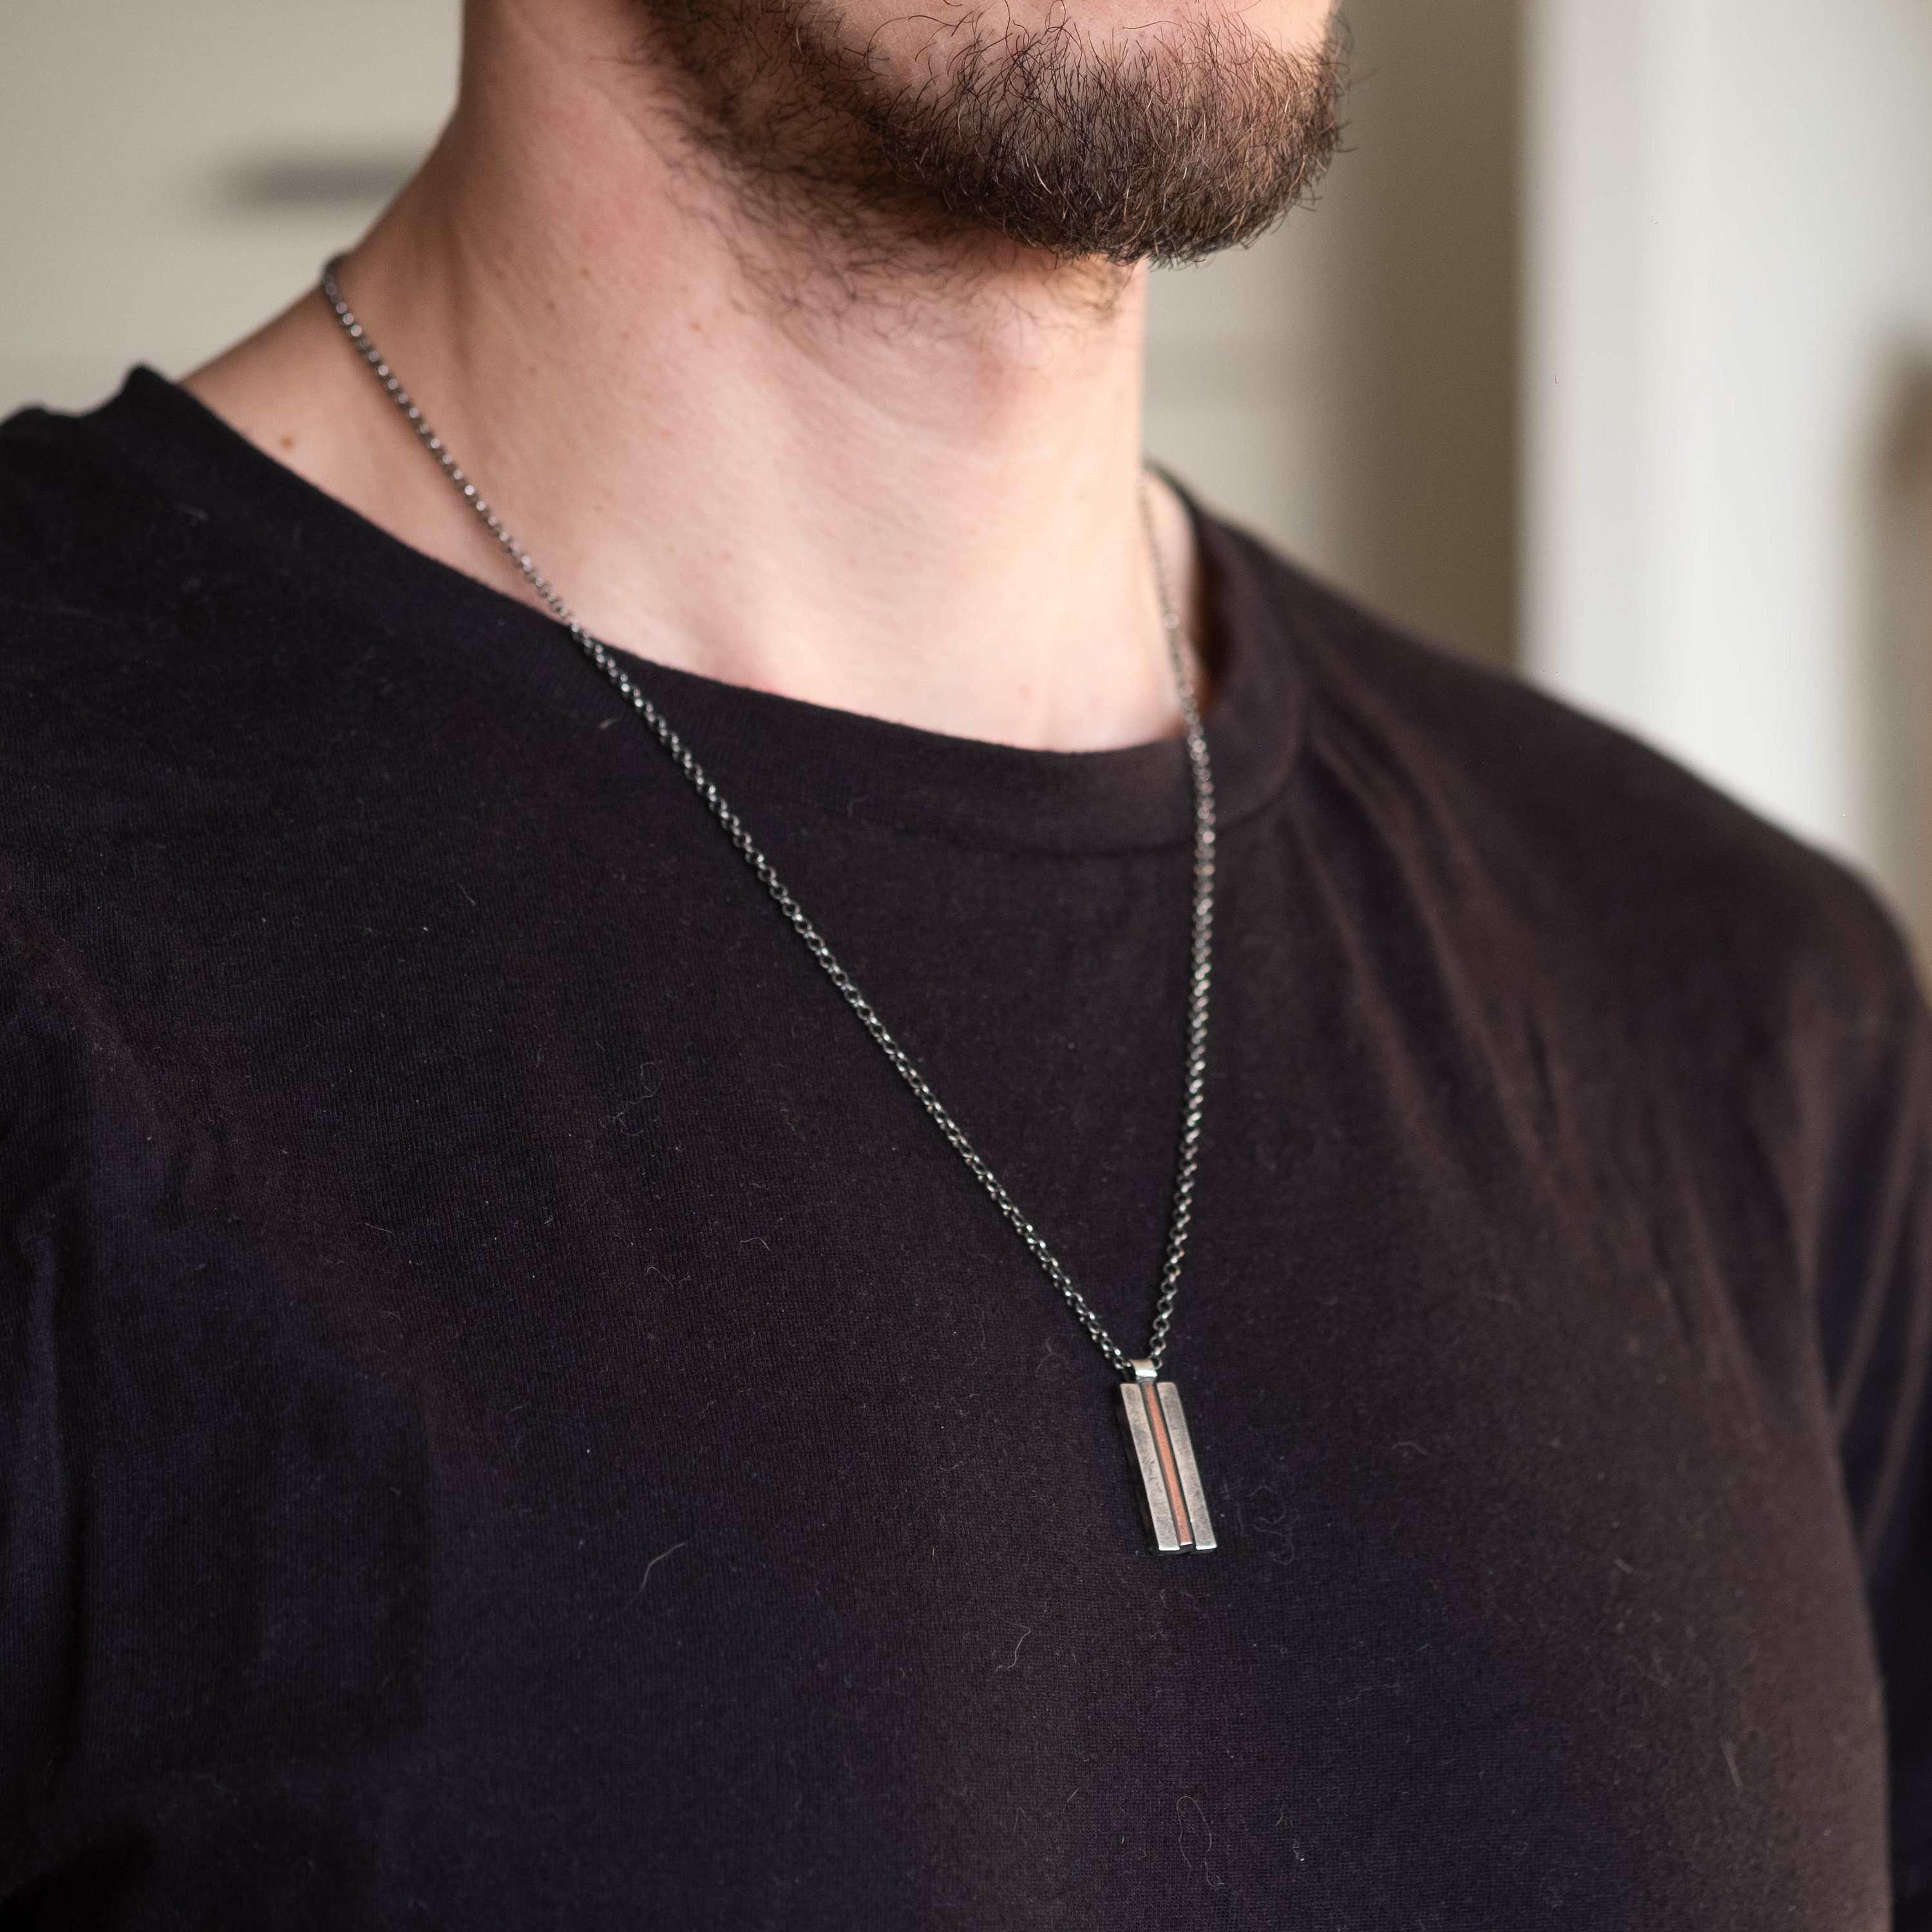 Mens Silver and Copper Bar Geometric Necklace Mens Gift - Etsy